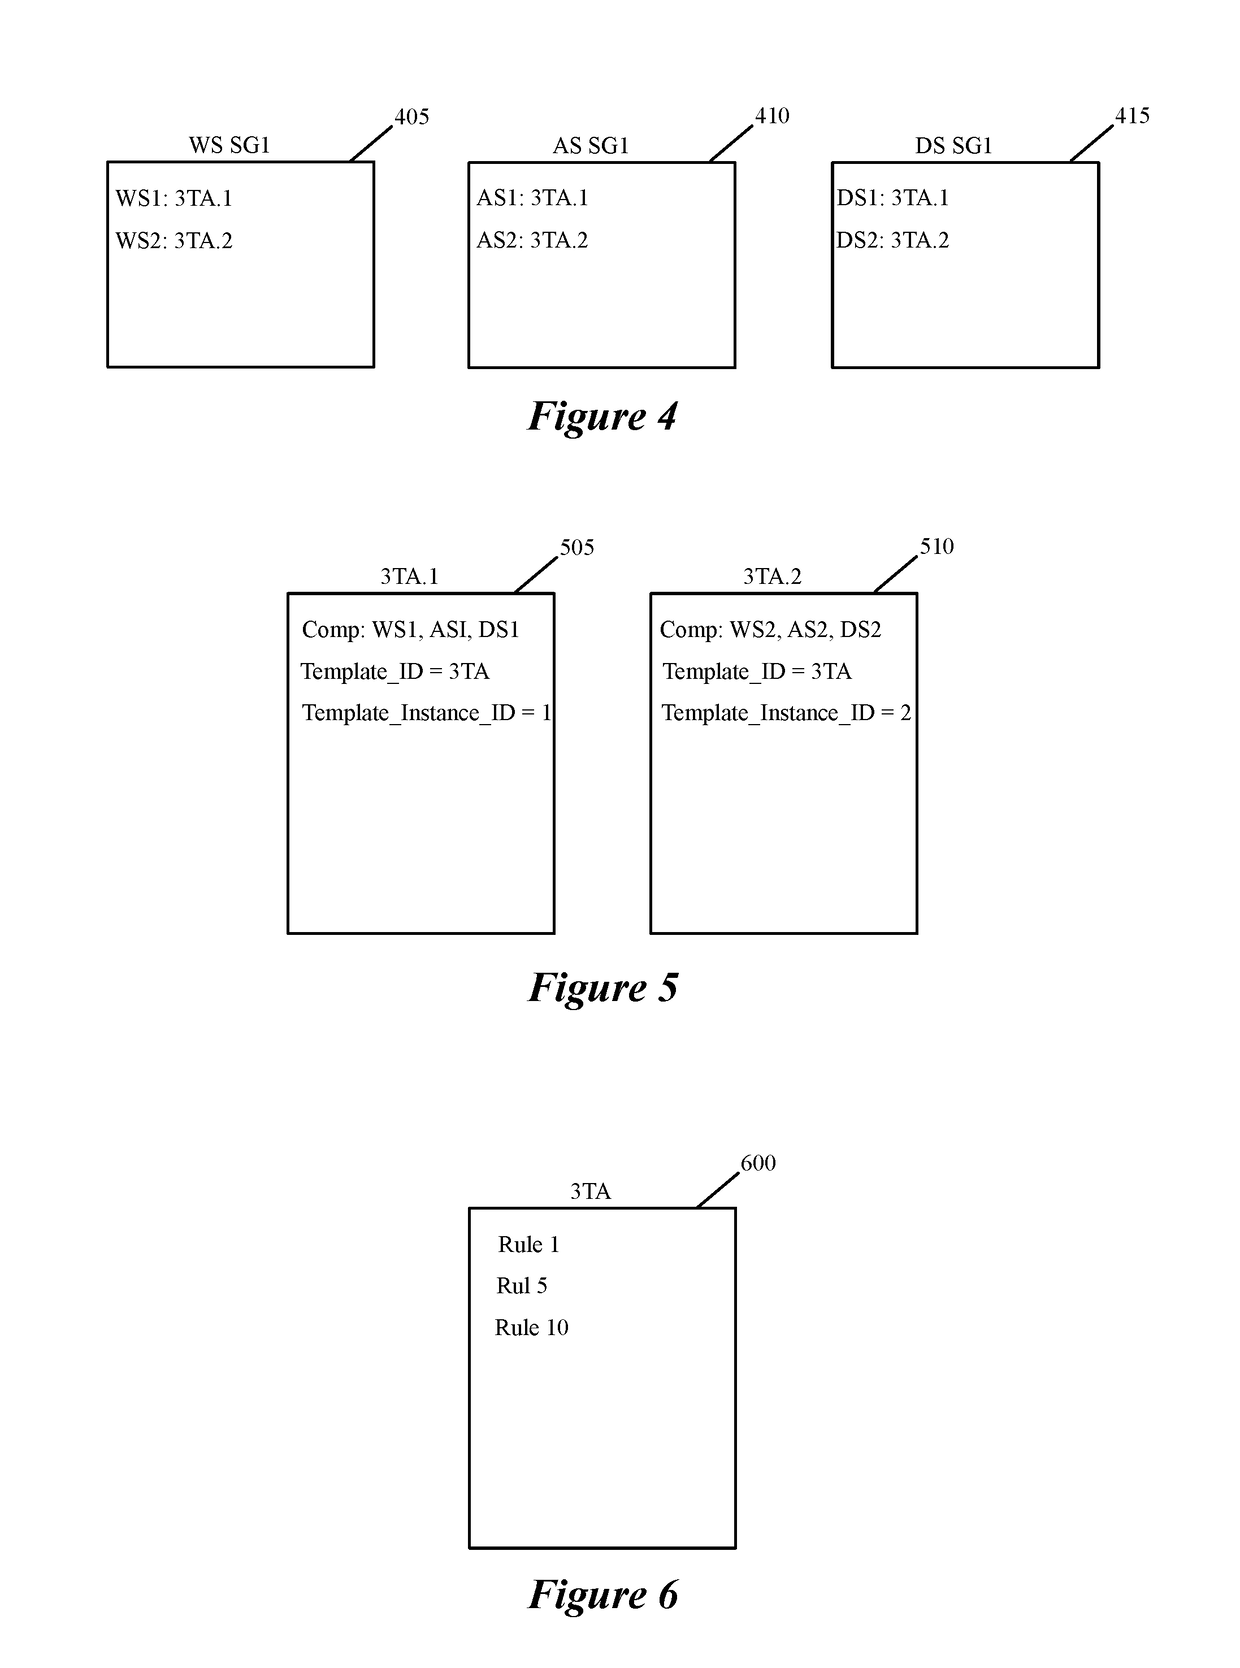 Datapath processing of service rules with qualifiers defined in terms of dynamic groups